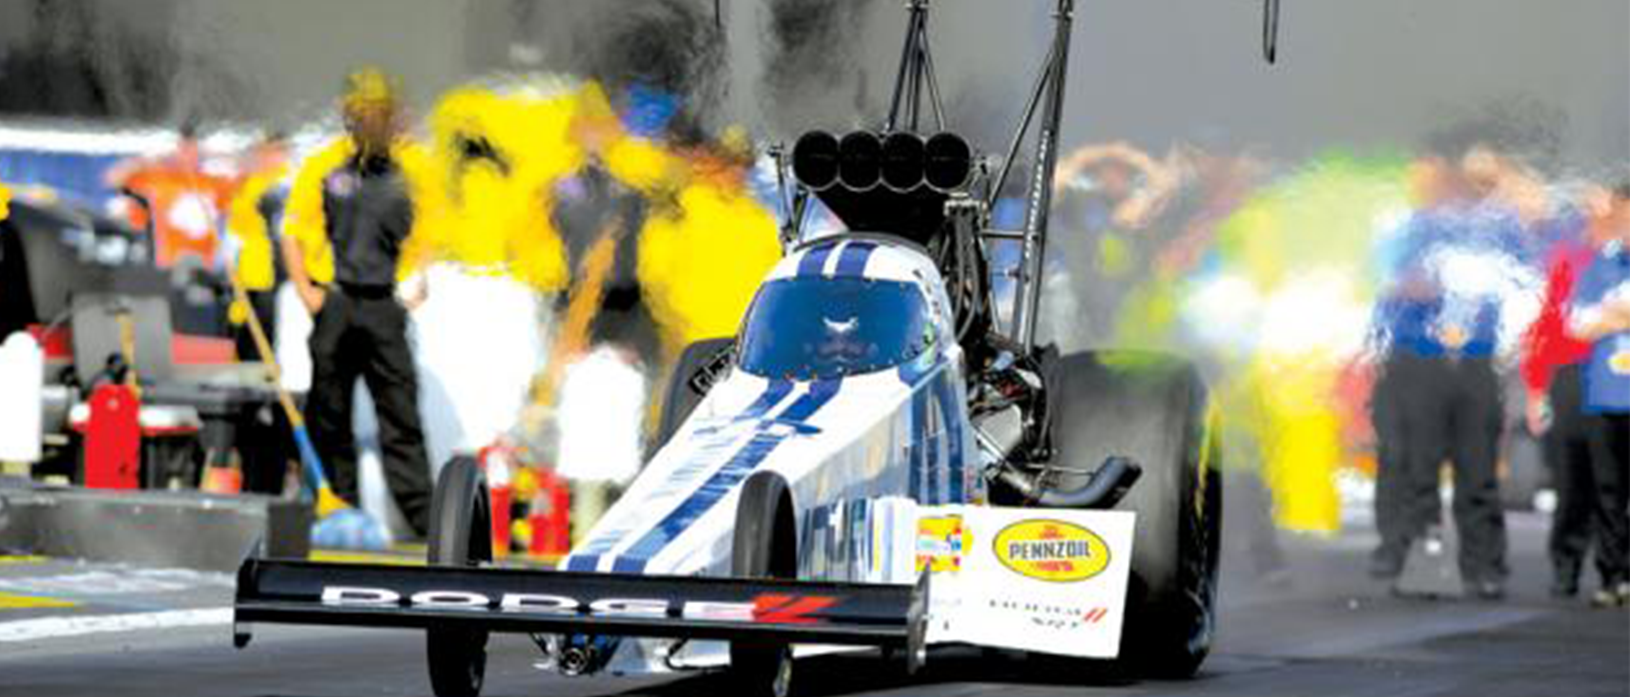 top fuel dragster on a drag strip